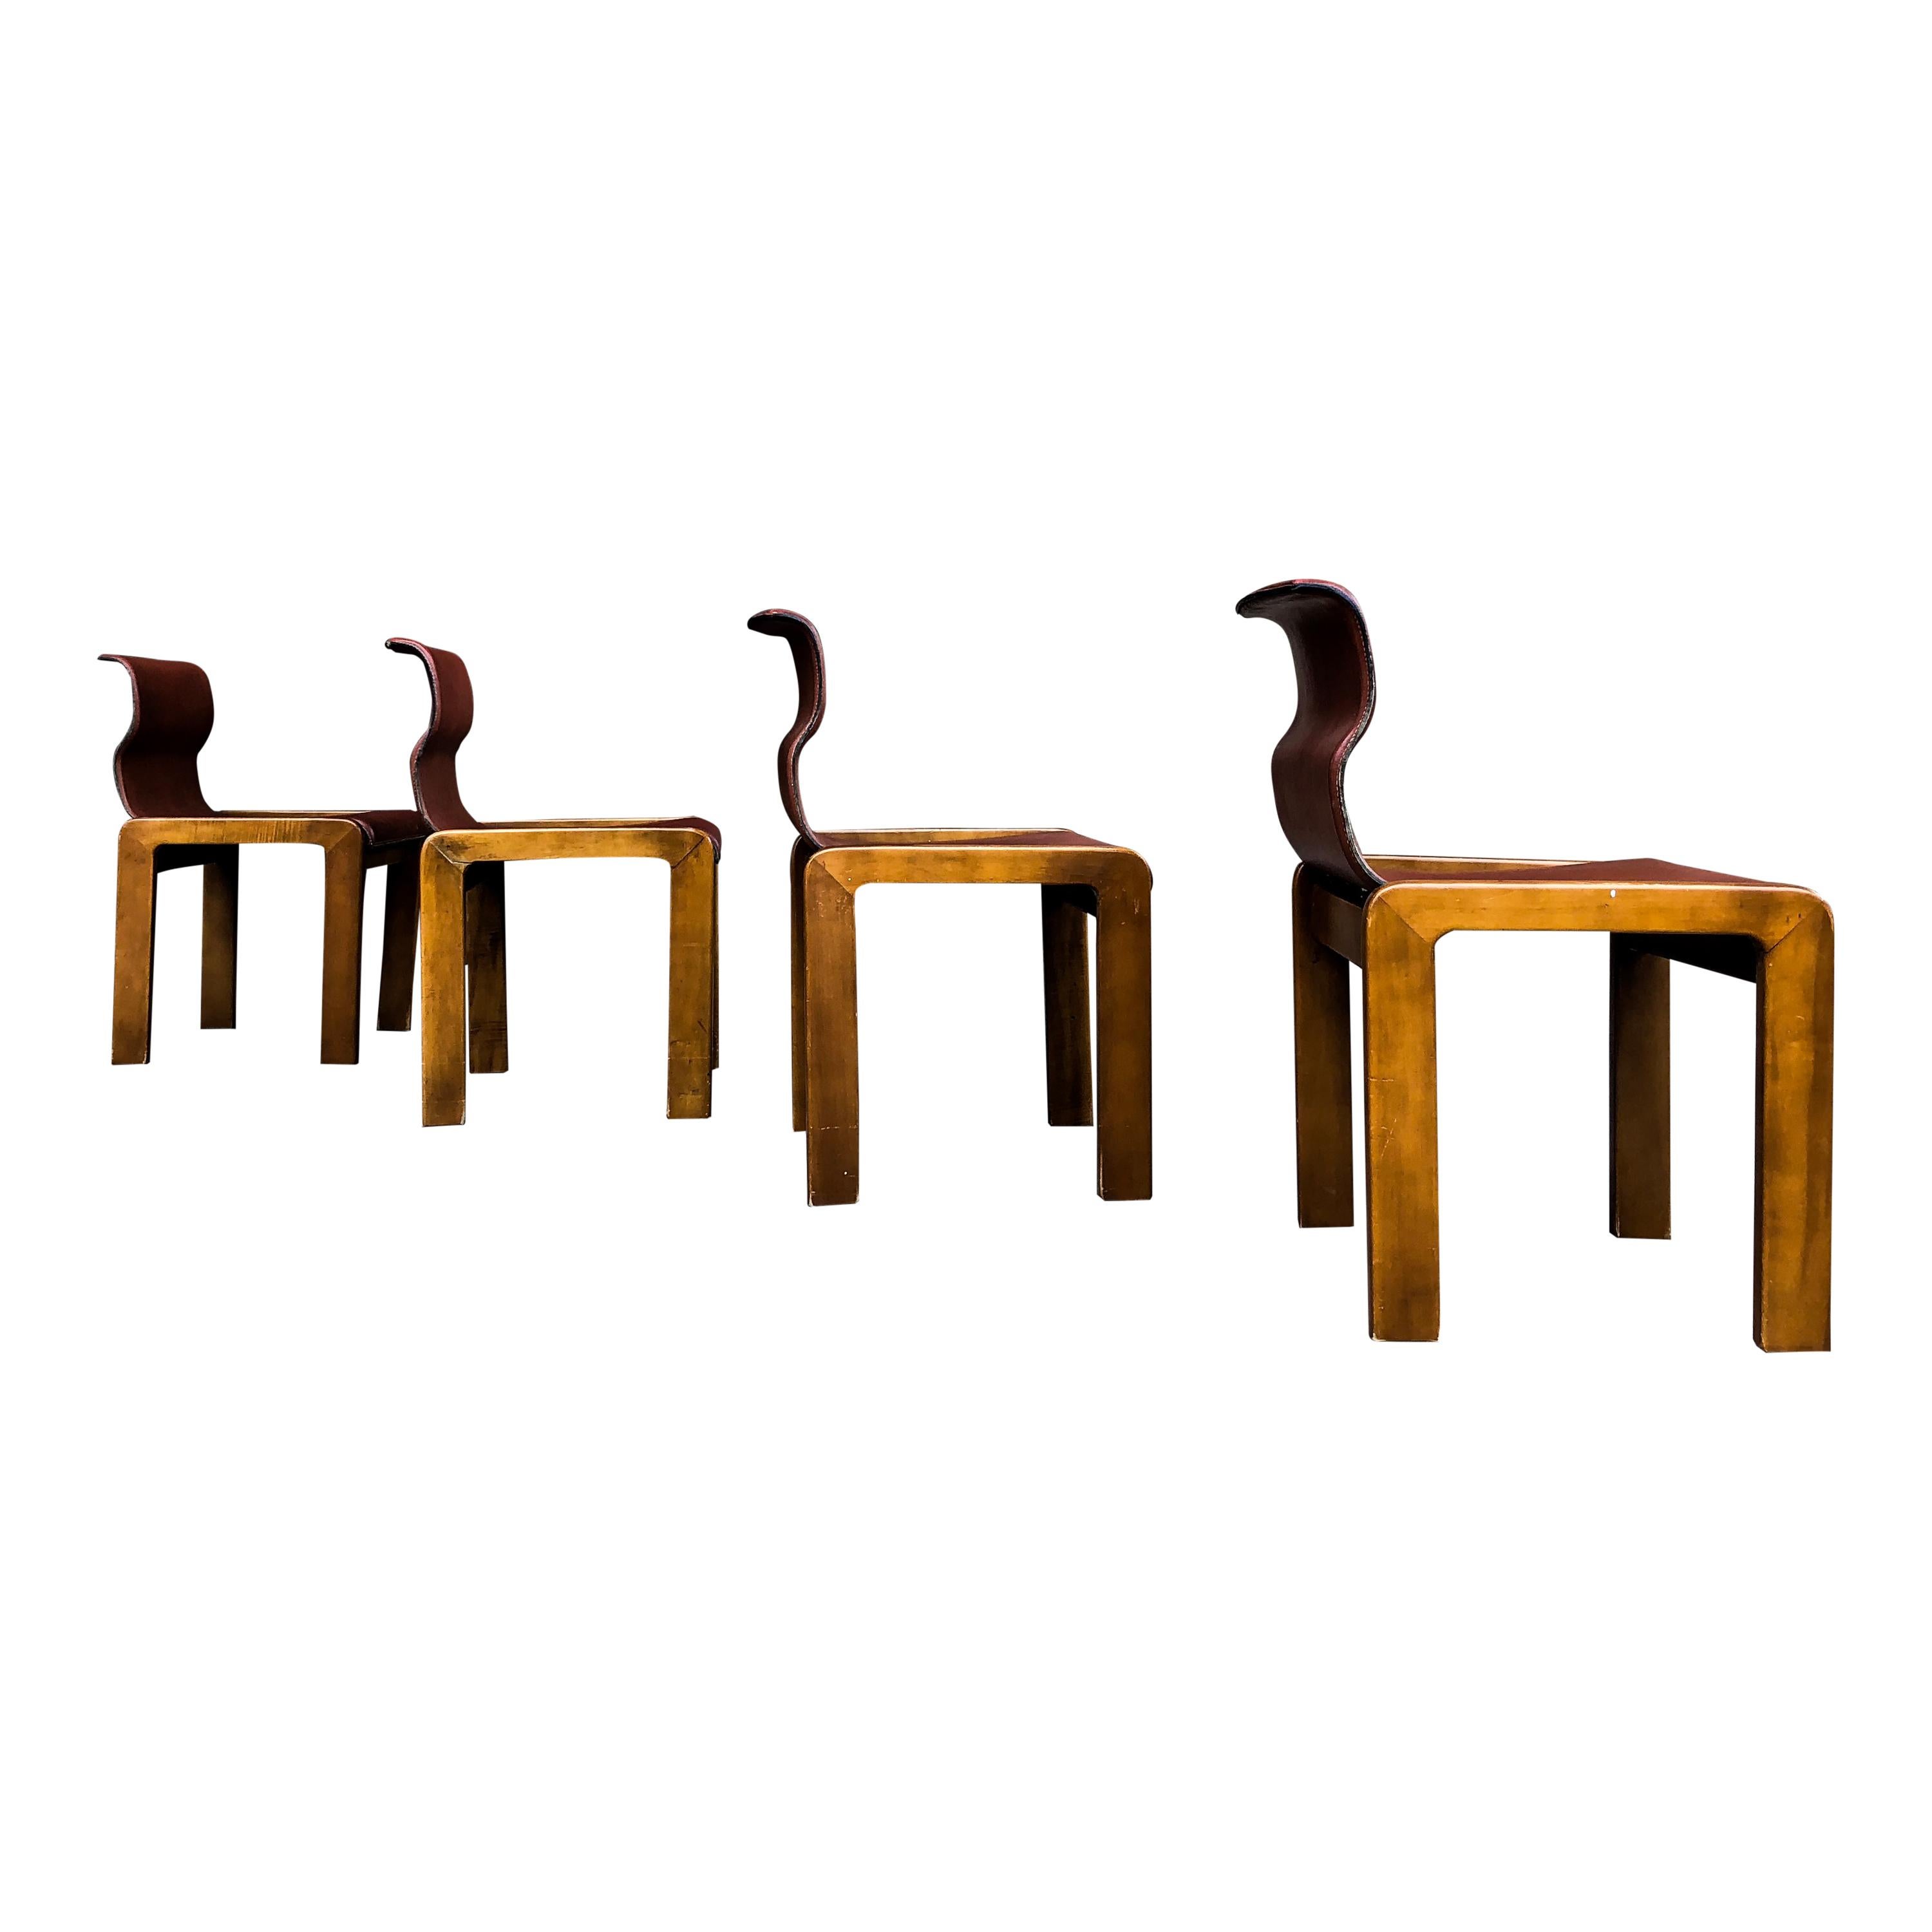 Afra & Tobia Scarpa Midcentury Leather and Plywood Dining Chair, 1966, Set of 4 For Sale 2